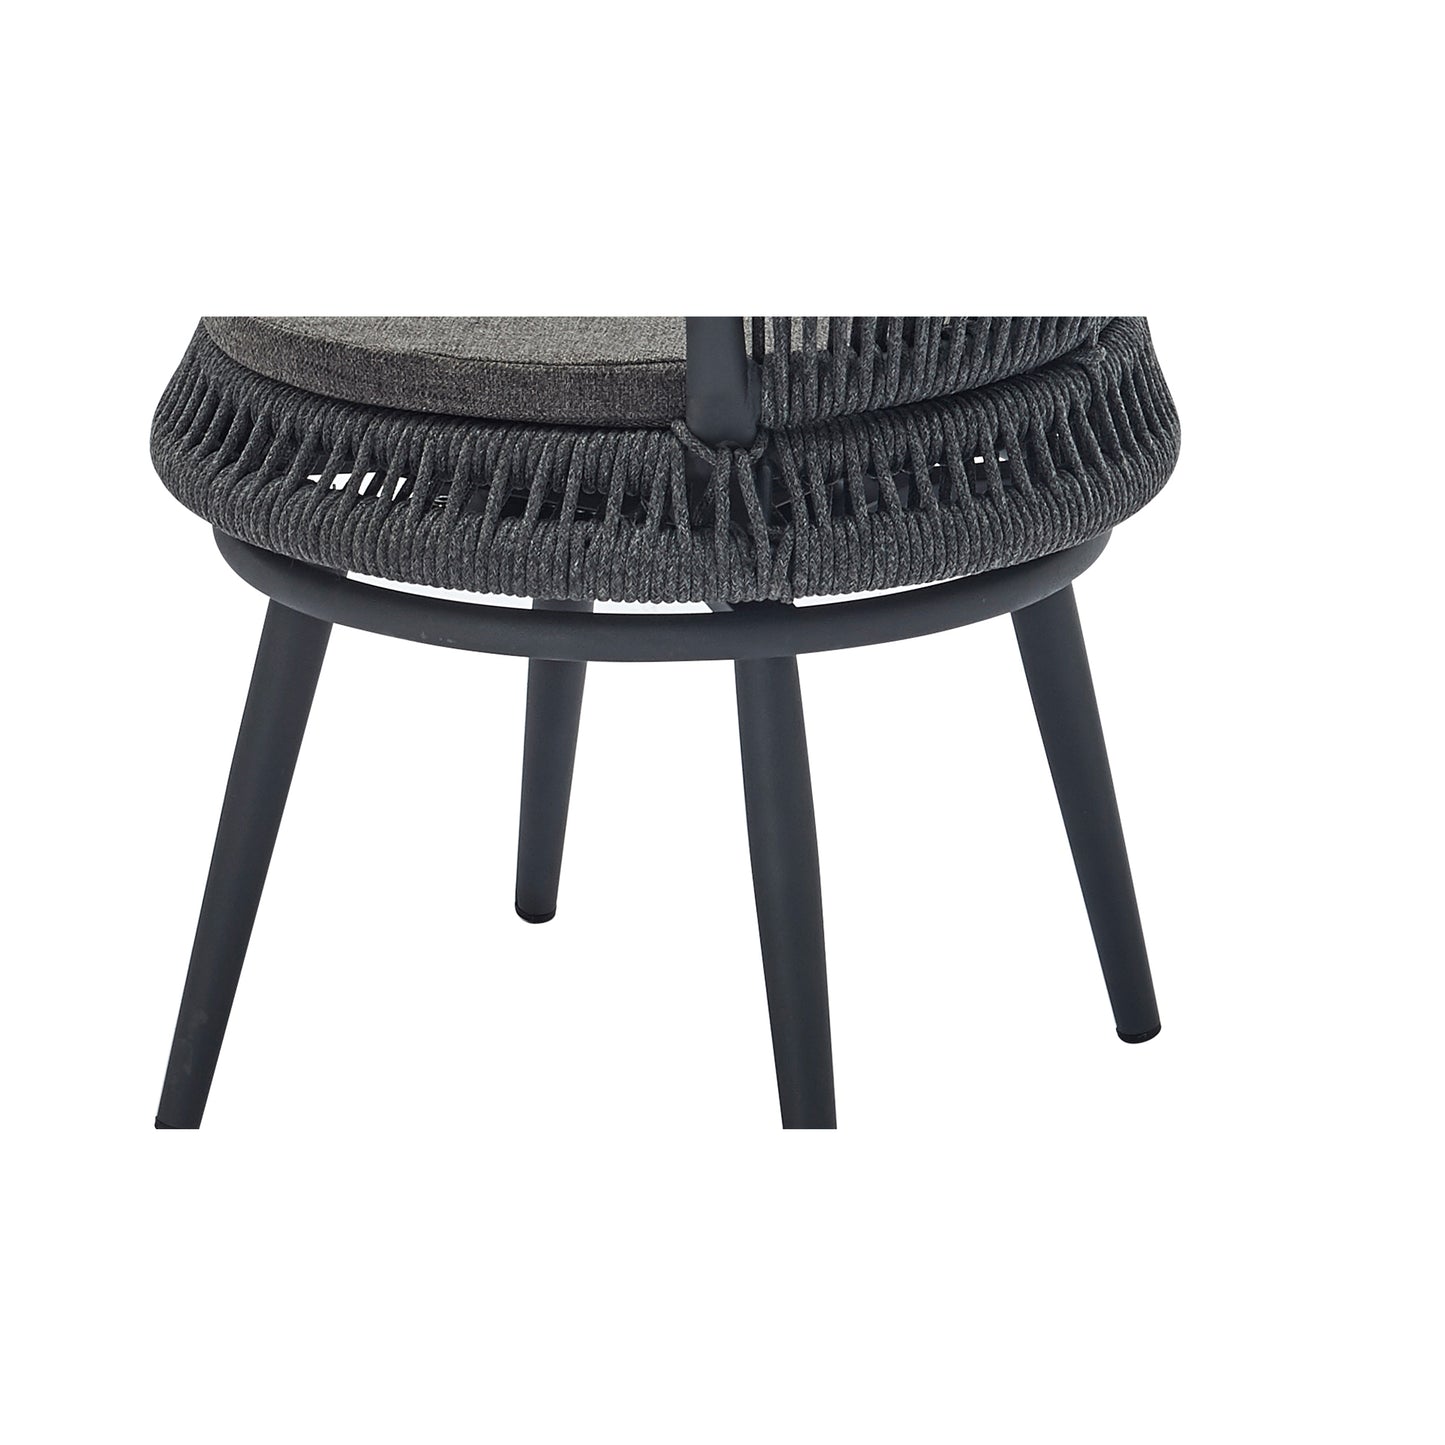 Modern Outdoor Table & Chairs -3 pcs.